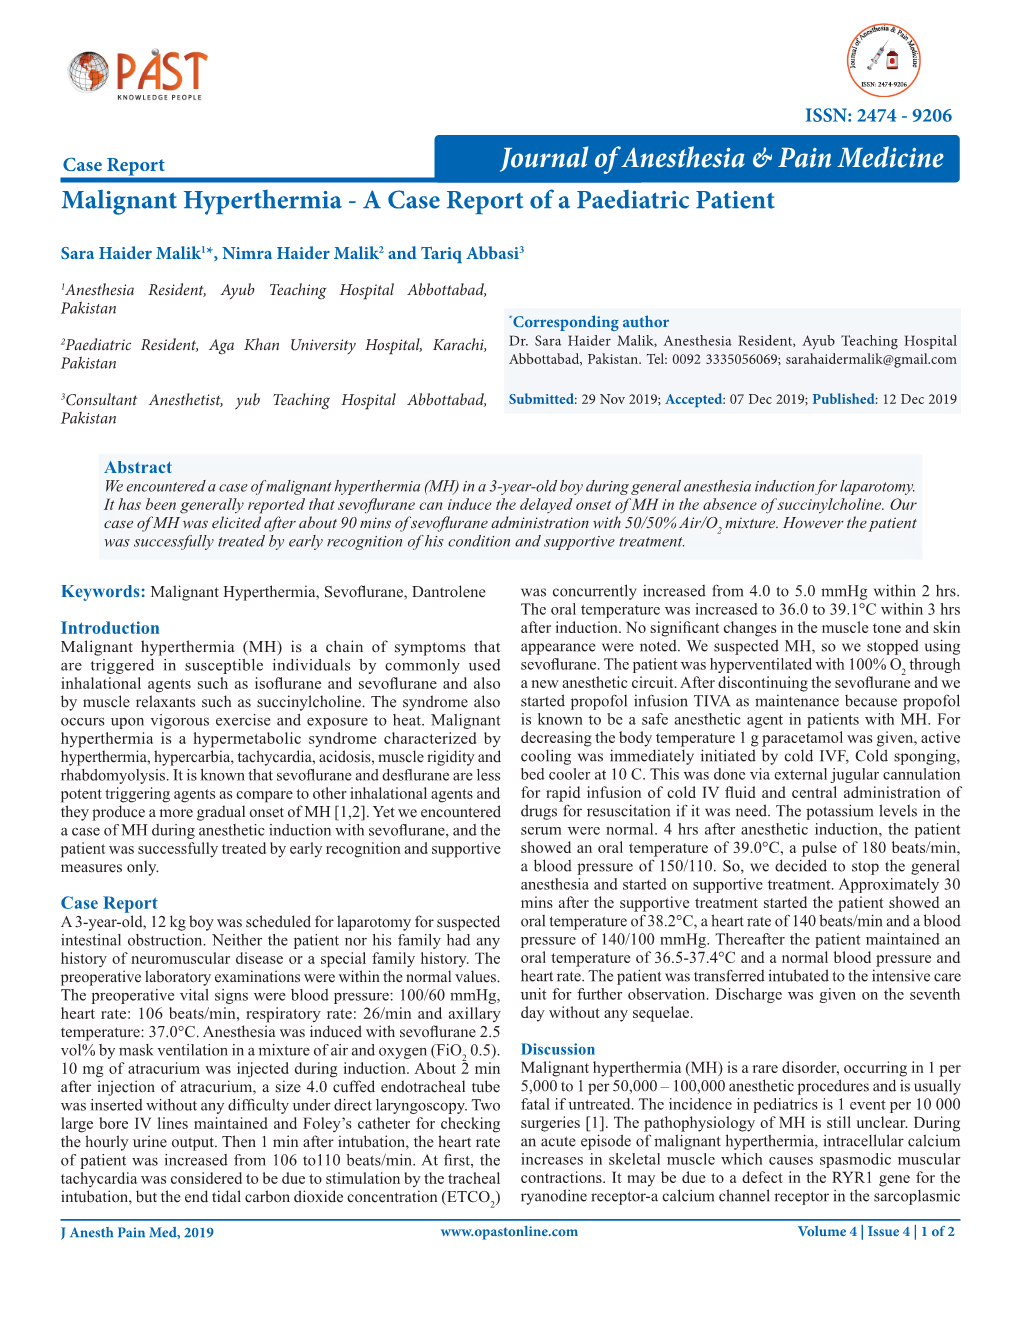 Malignant Hyperthermia - a Case Report of a Paediatric Patient